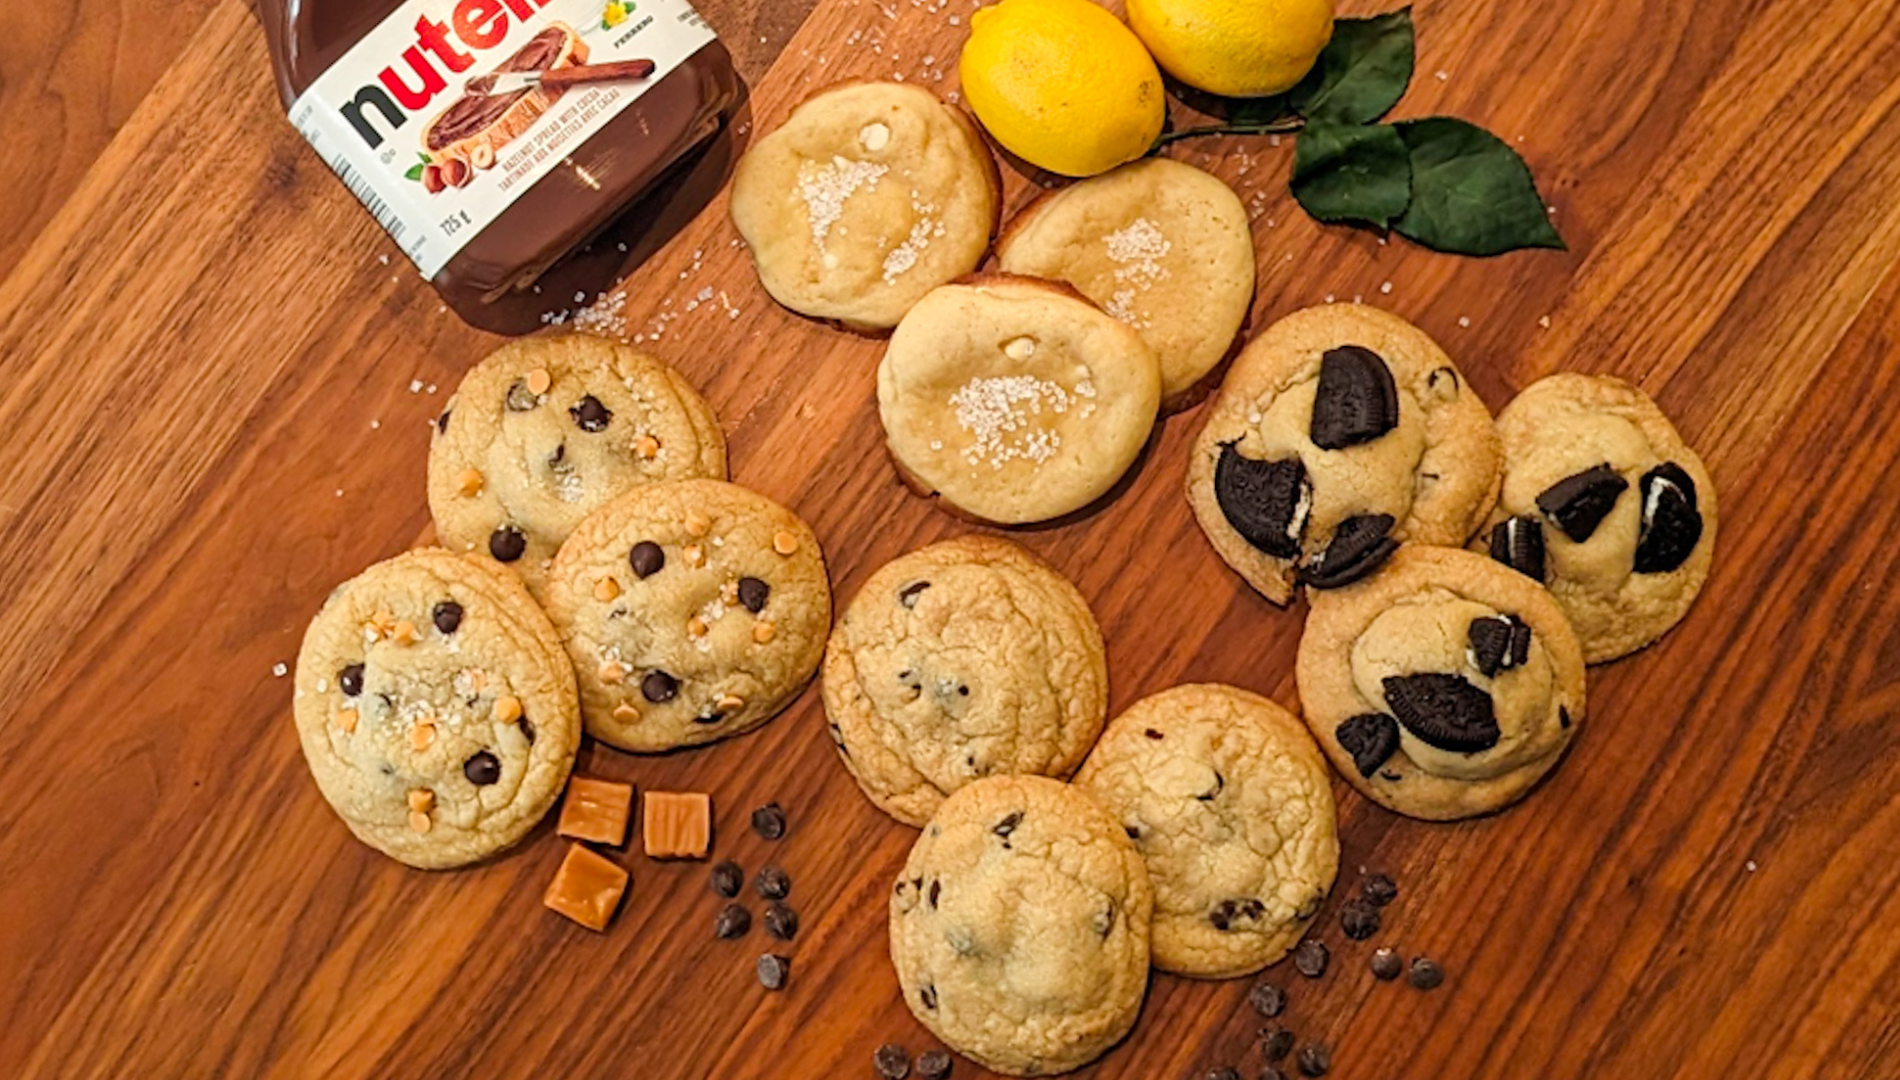 The Stuffed Cookie Pack